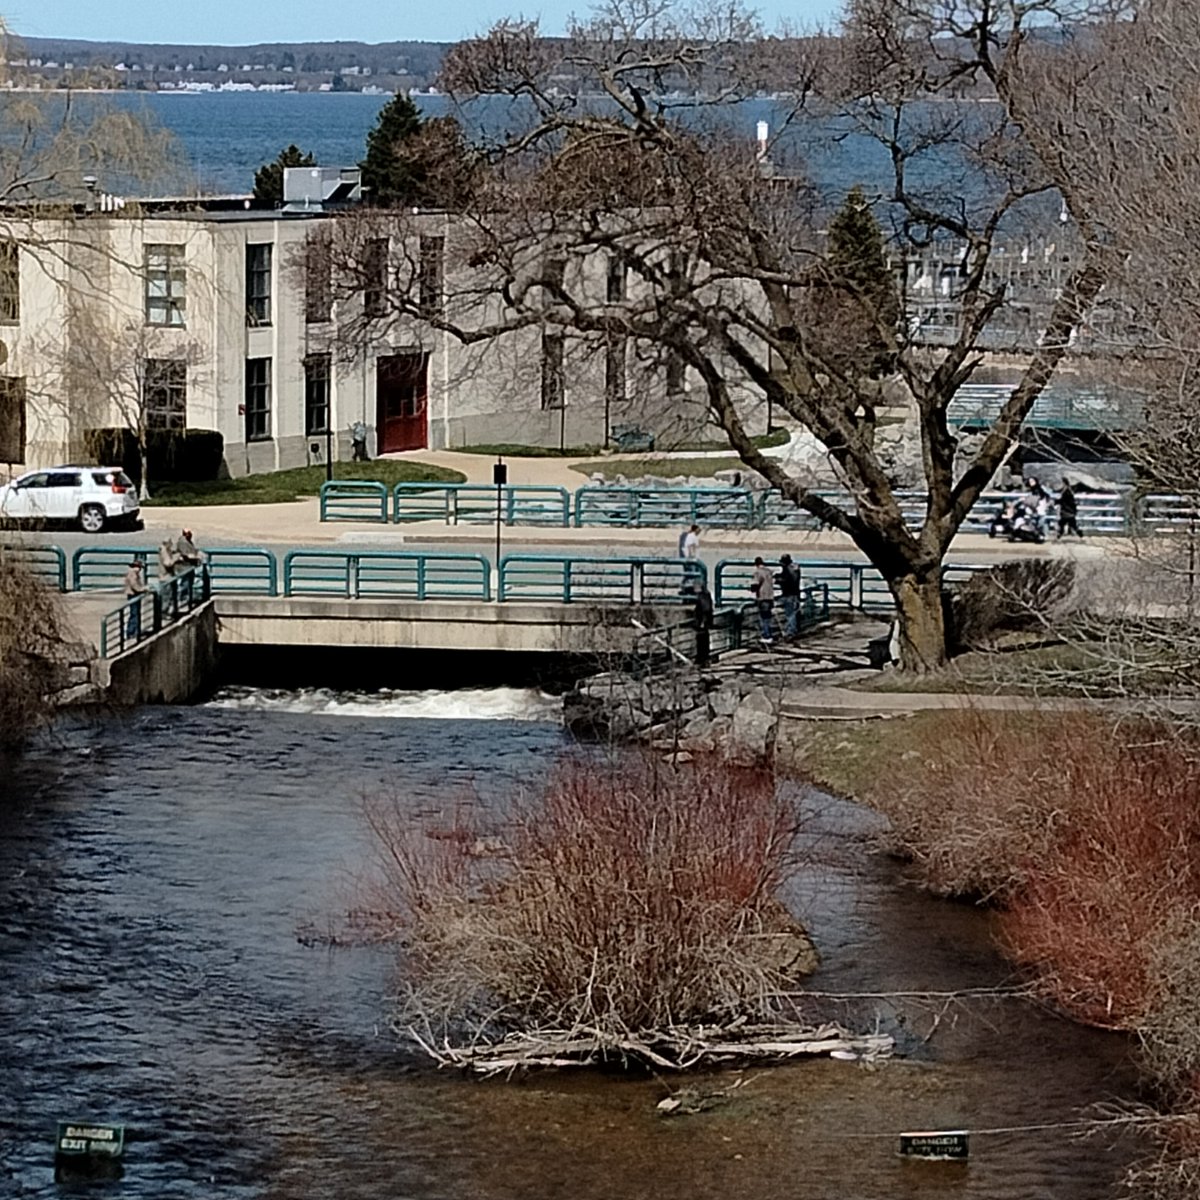 High noon. Fishing🎣 for steelhead trout in front of Petoskey City Hall. 

#PureMichigan